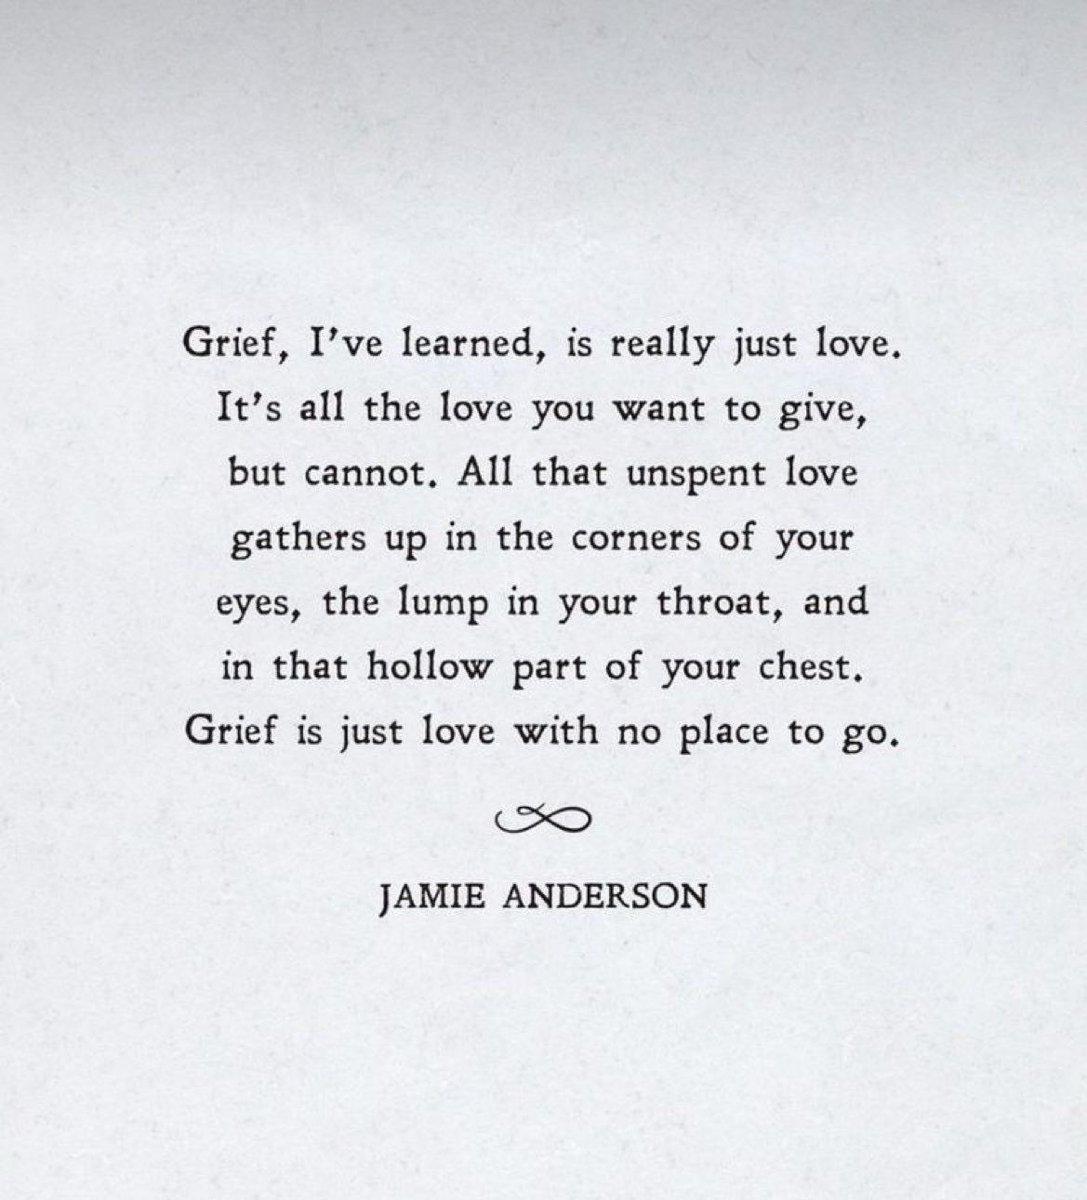 This quote sums it up ‘Grief, I have learned is really just love. It’s all the love that you want to give, but cannot. All that unspent love gathers up in the corners of your eyes,the lump in your throat, & in the hollow part of your chest. Grief is just love with no place to go’